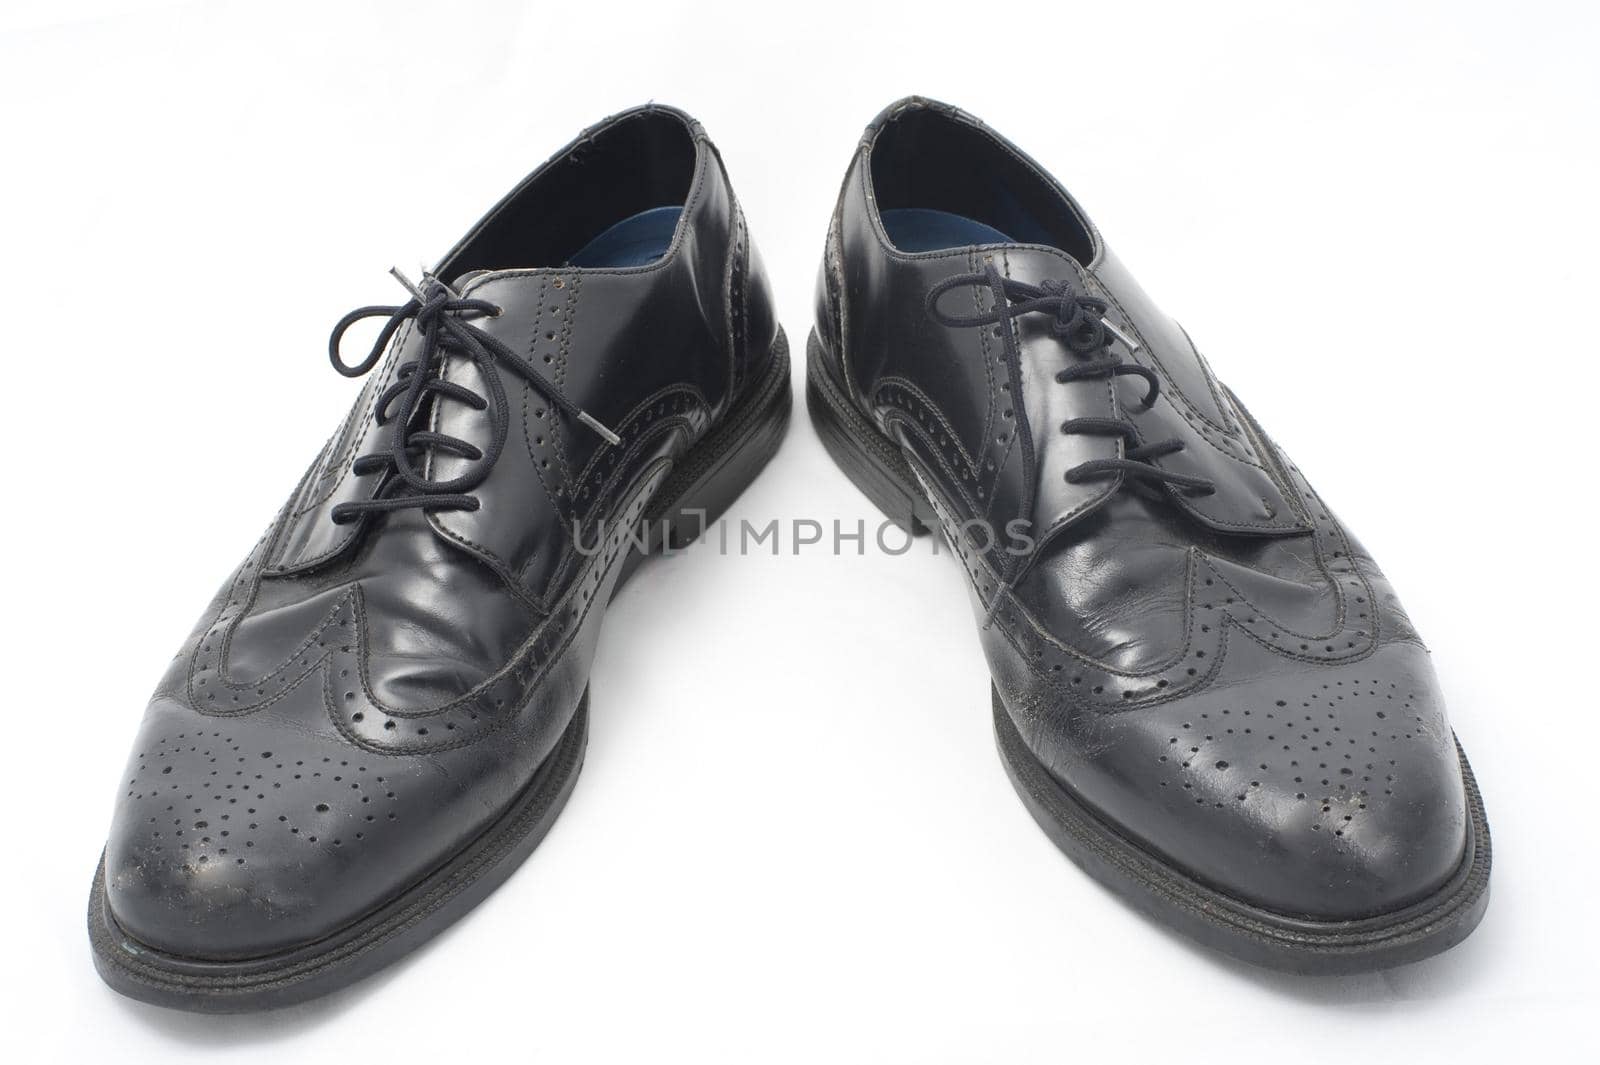 Leather dress shoes for men by sanisra